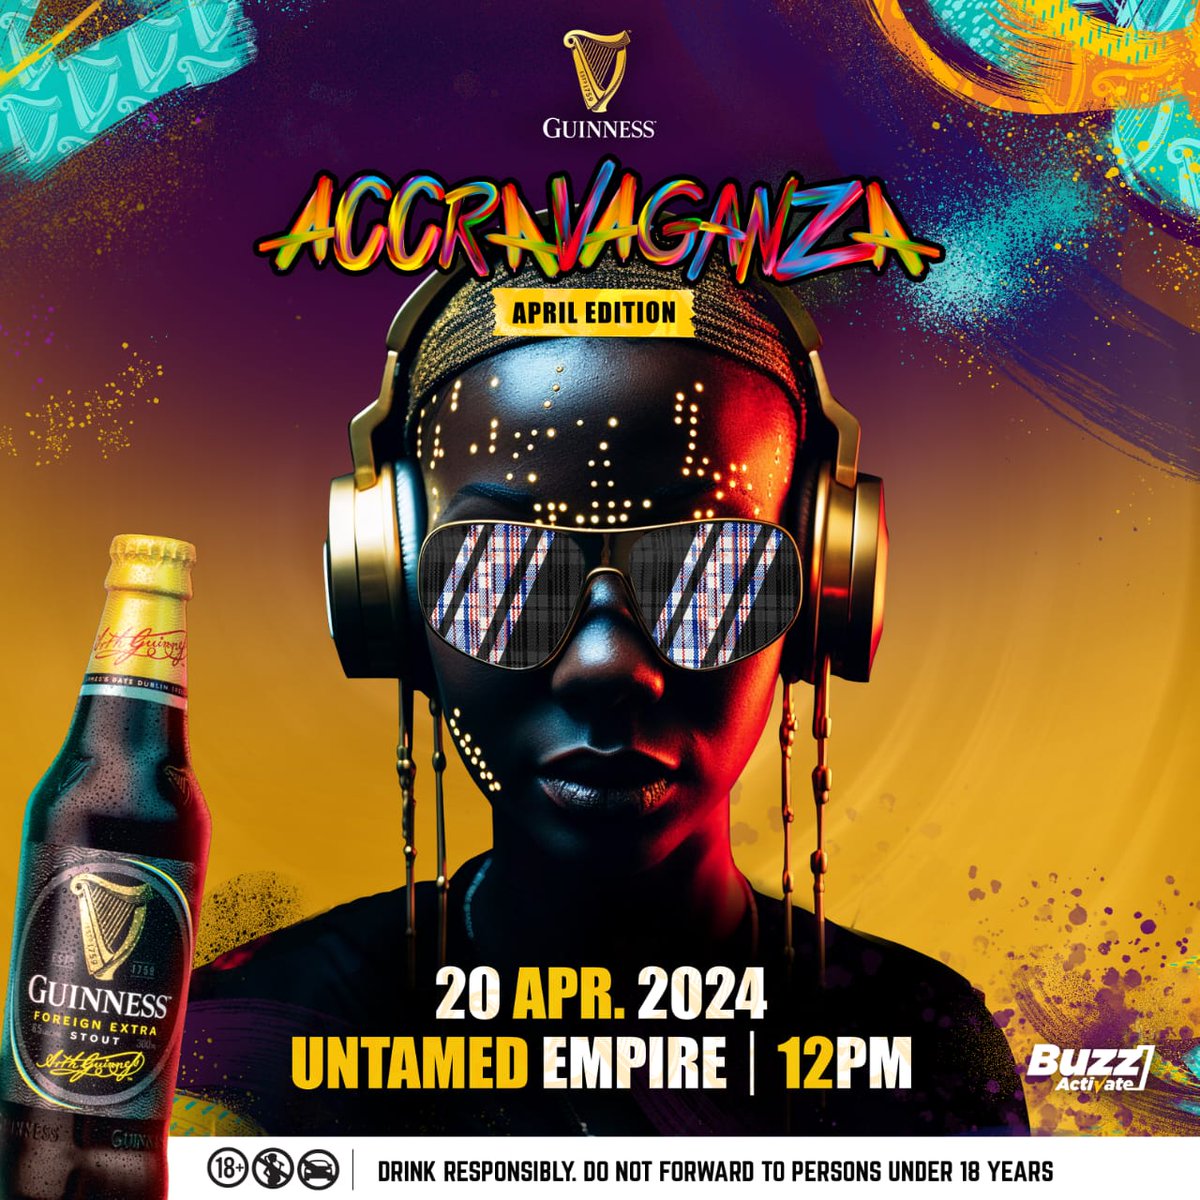 Need plans for Saturday? Look no further. Accravaganza is the place to be🎶 

#GuinessAccravaganza